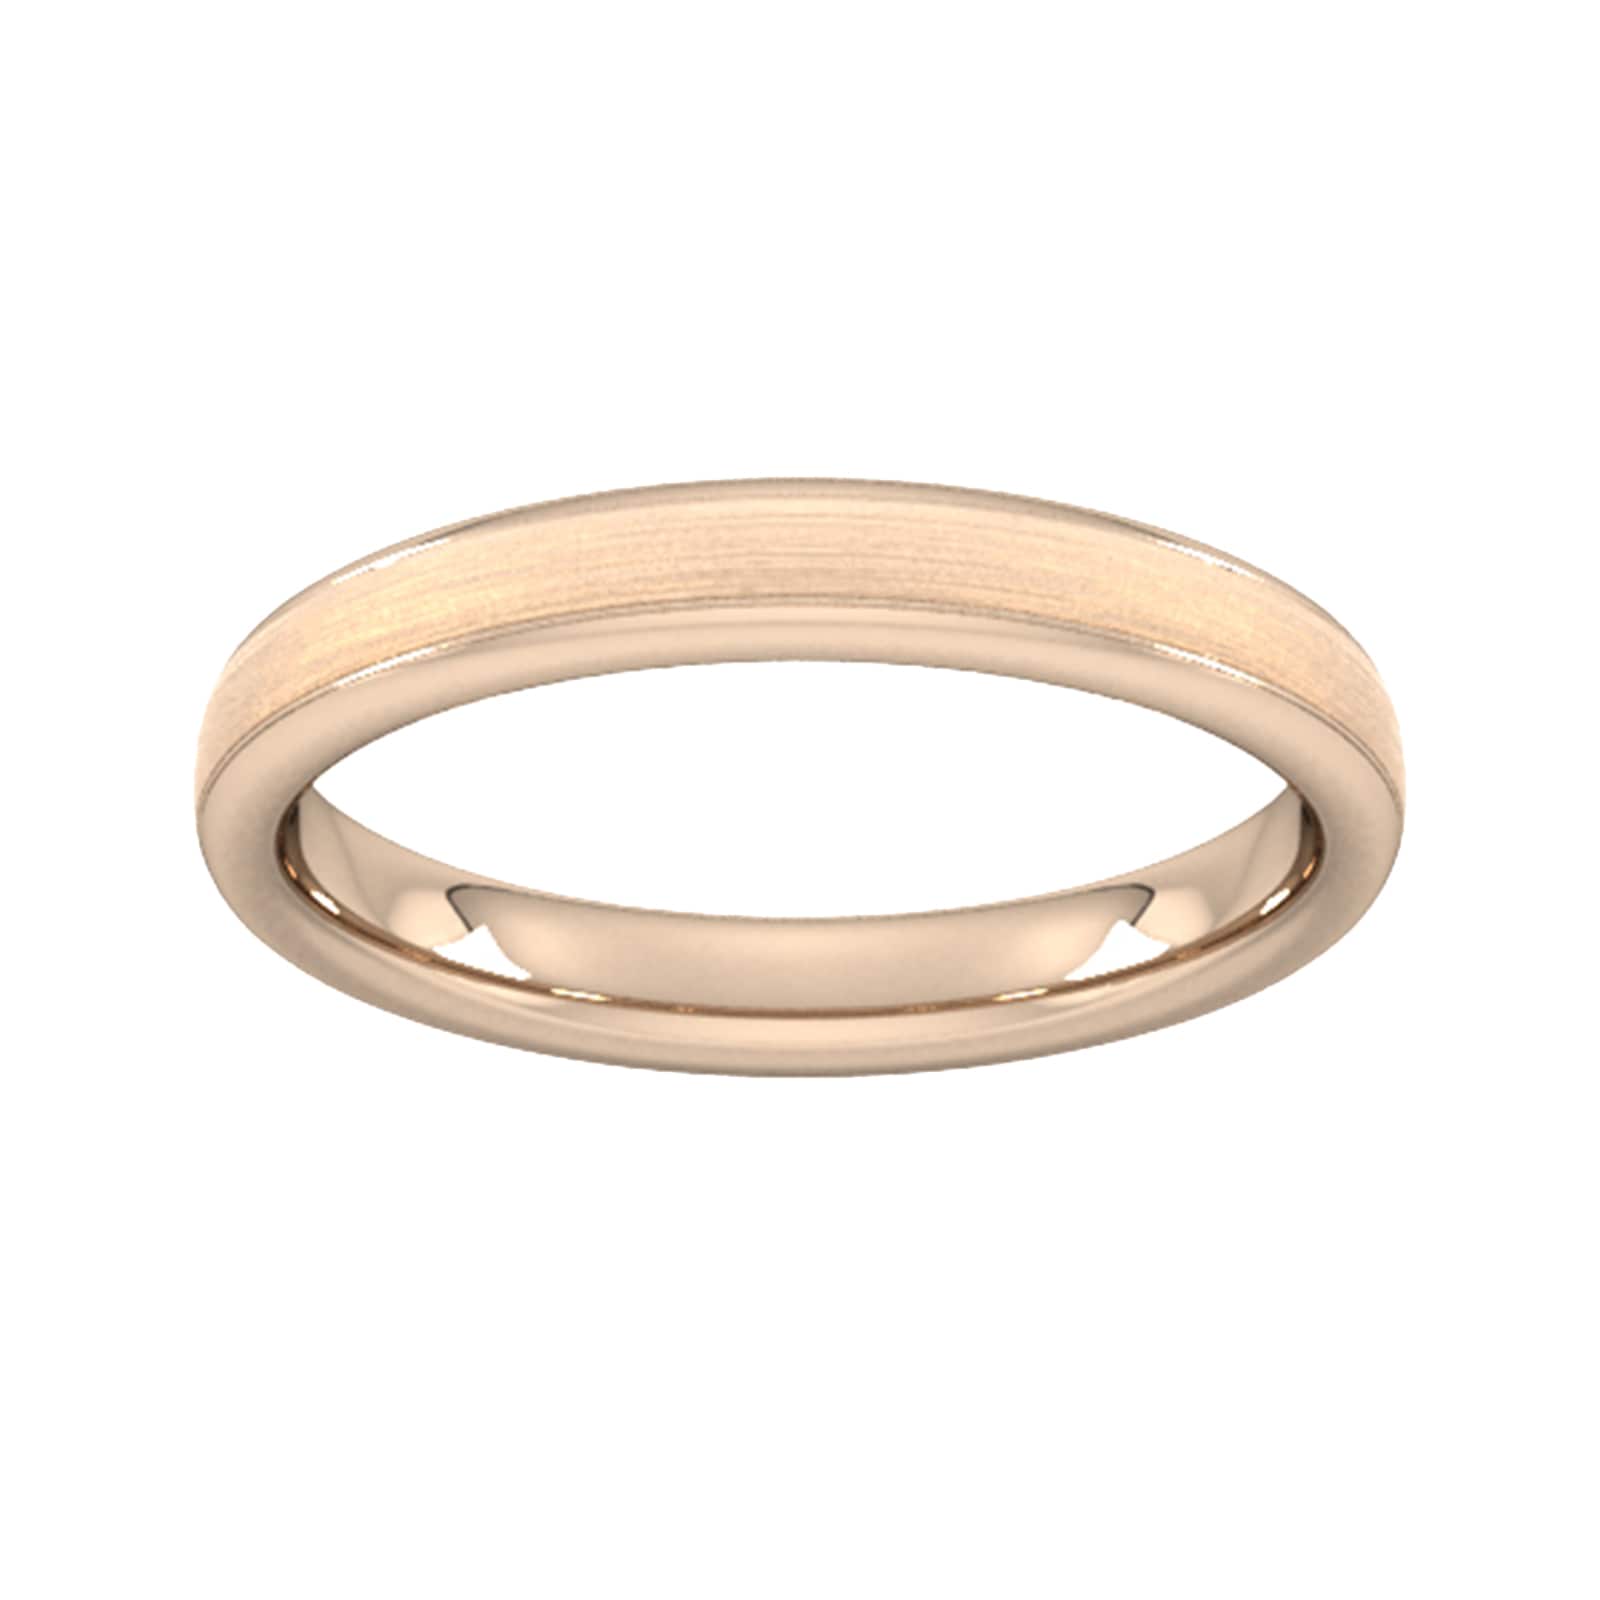 3mm Flat Court Heavy Matt Centre With Grooves Wedding Ring In 18 Carat Rose Gold - Ring Size N